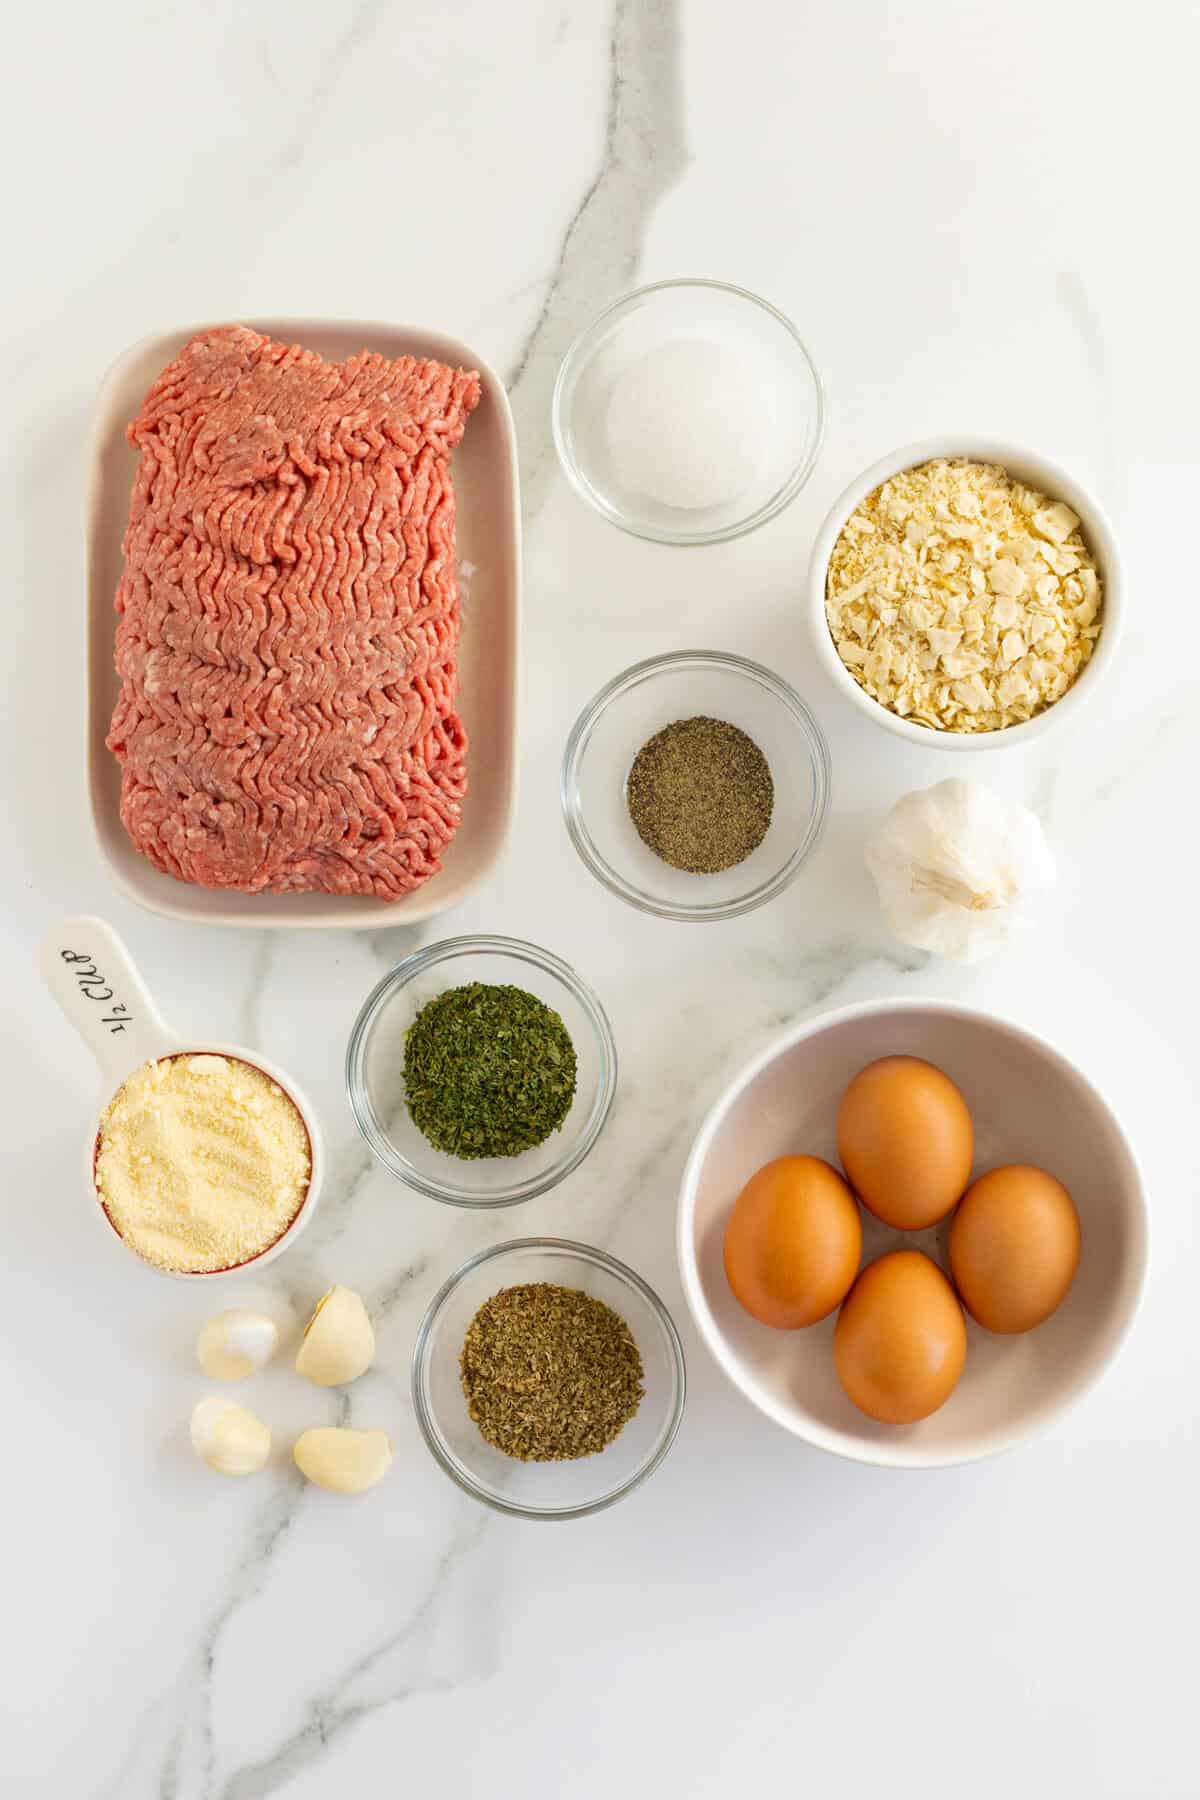 homemade meatballs ingredients in small clear and white bowls